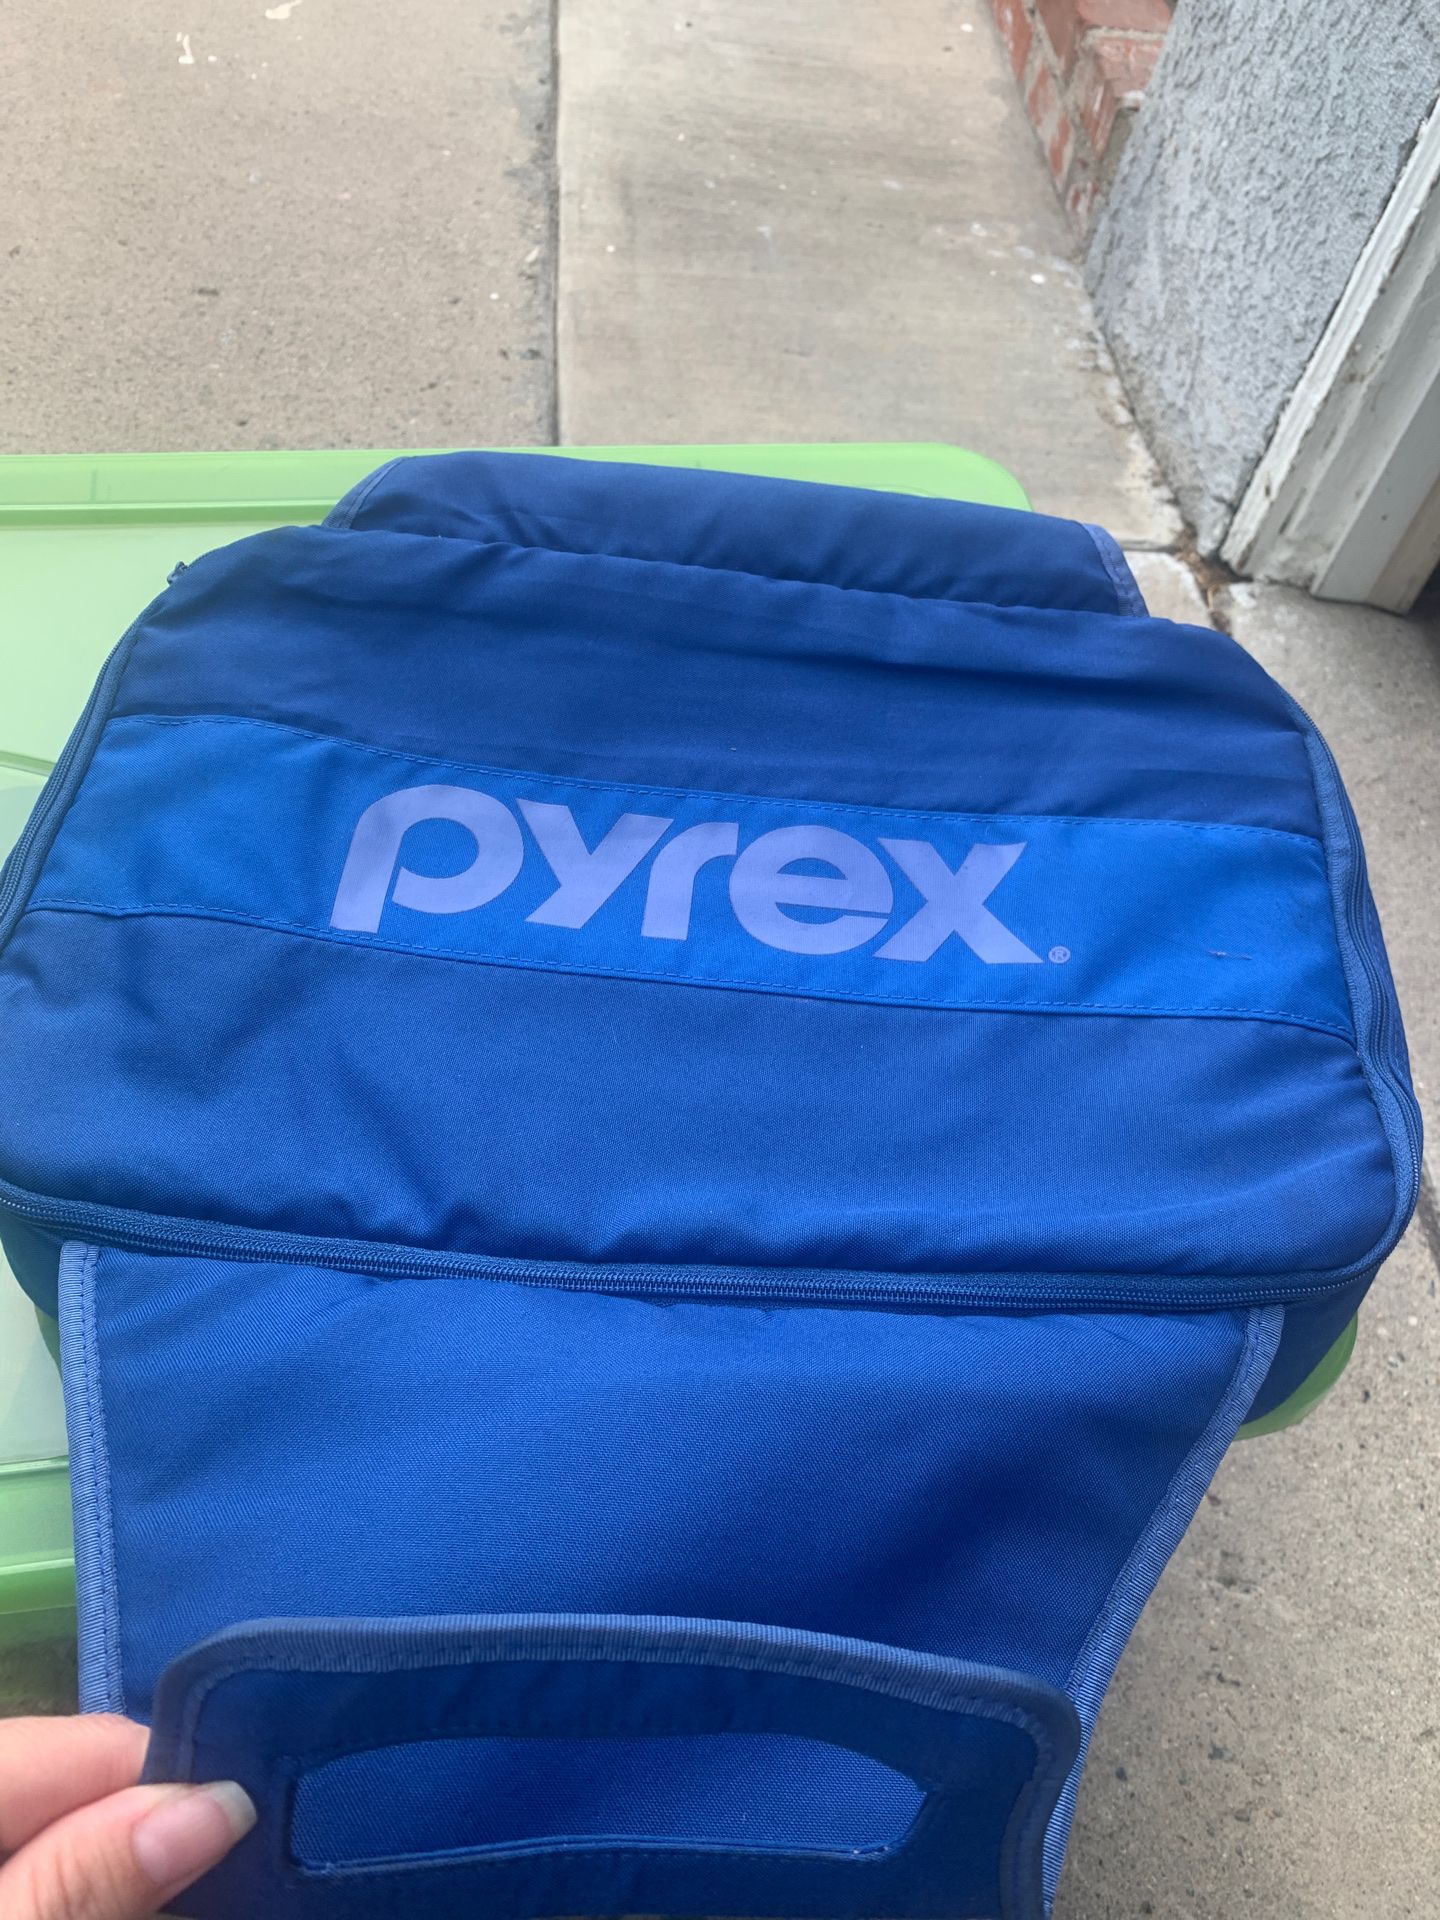 Pyrex carrying case and container